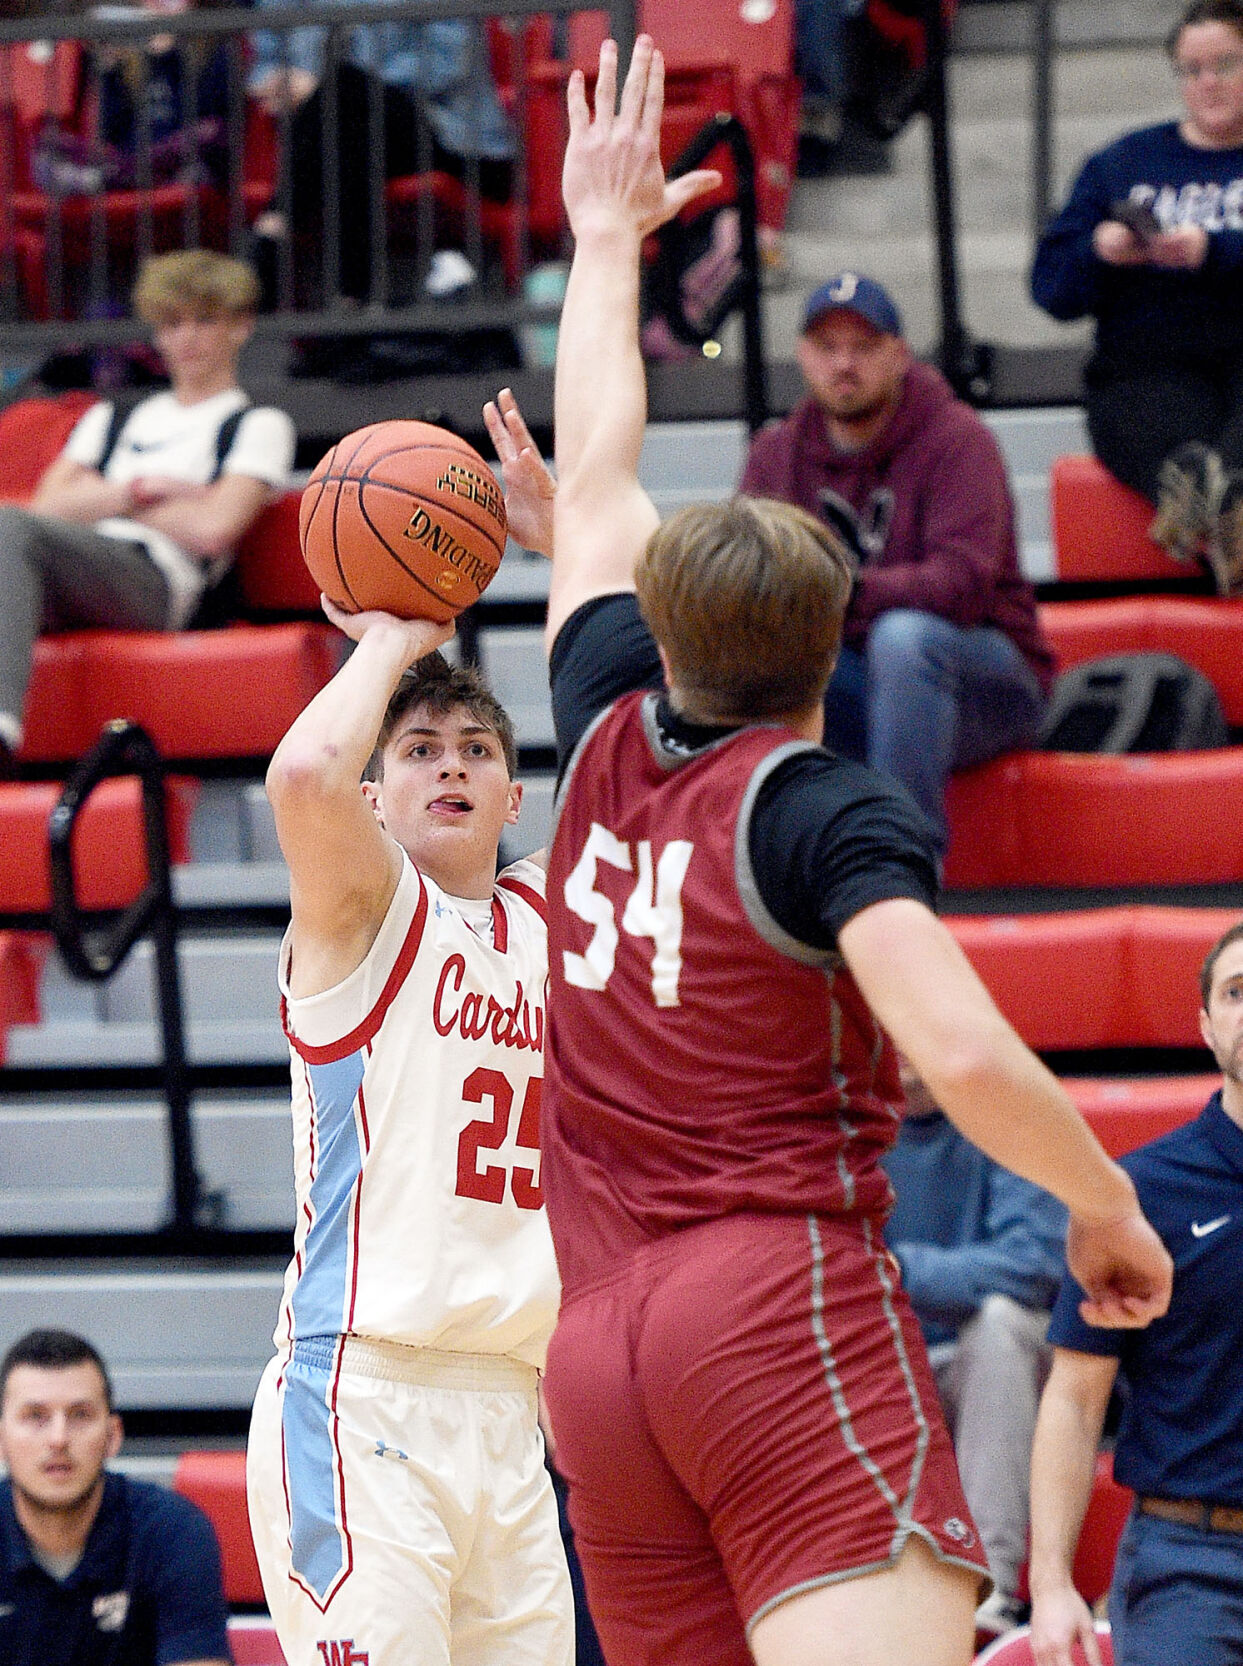 Webb City High School Cardinals Victorious Over Joplin Eagles in 73-43 Central Ozark Conference Matchup